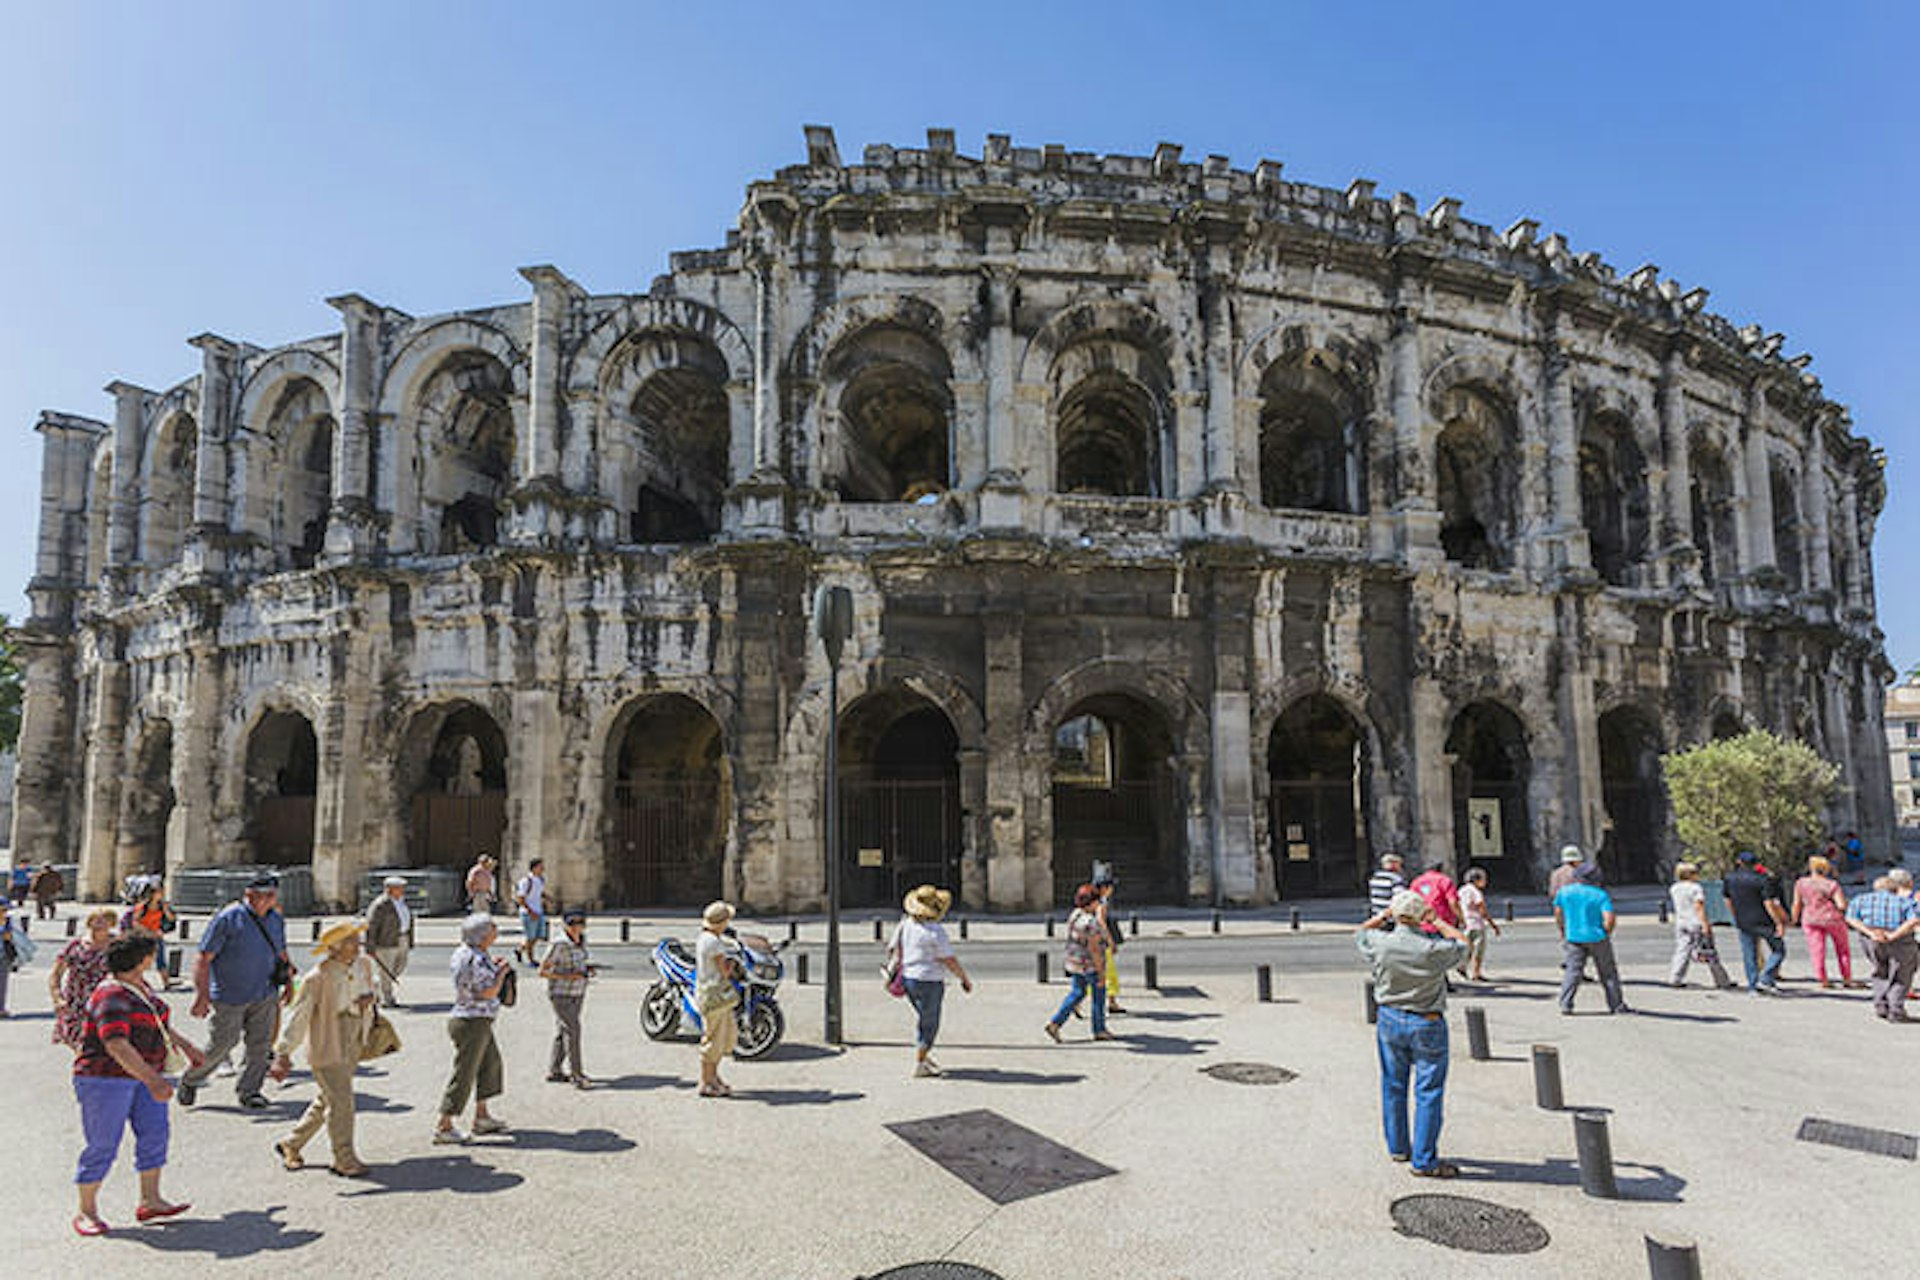 Tourists outside the 1st-century Arènes de Nîmes. Image by Ken Welsh / Photolibrary / Getty Images